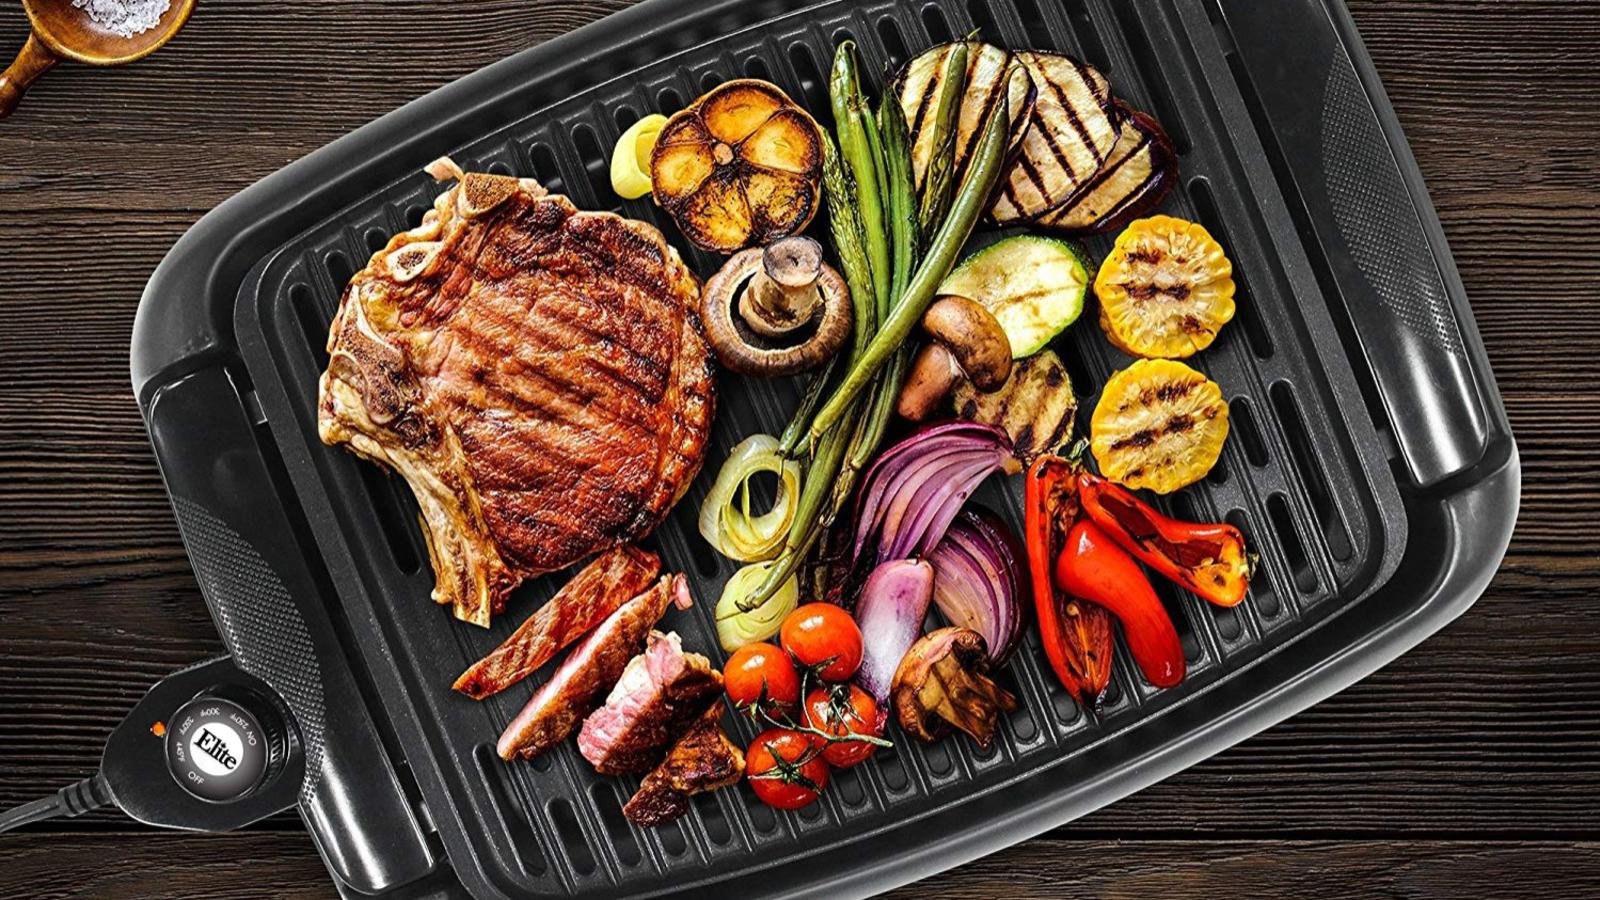 How To Select The Best Indoor Grill For Steaks